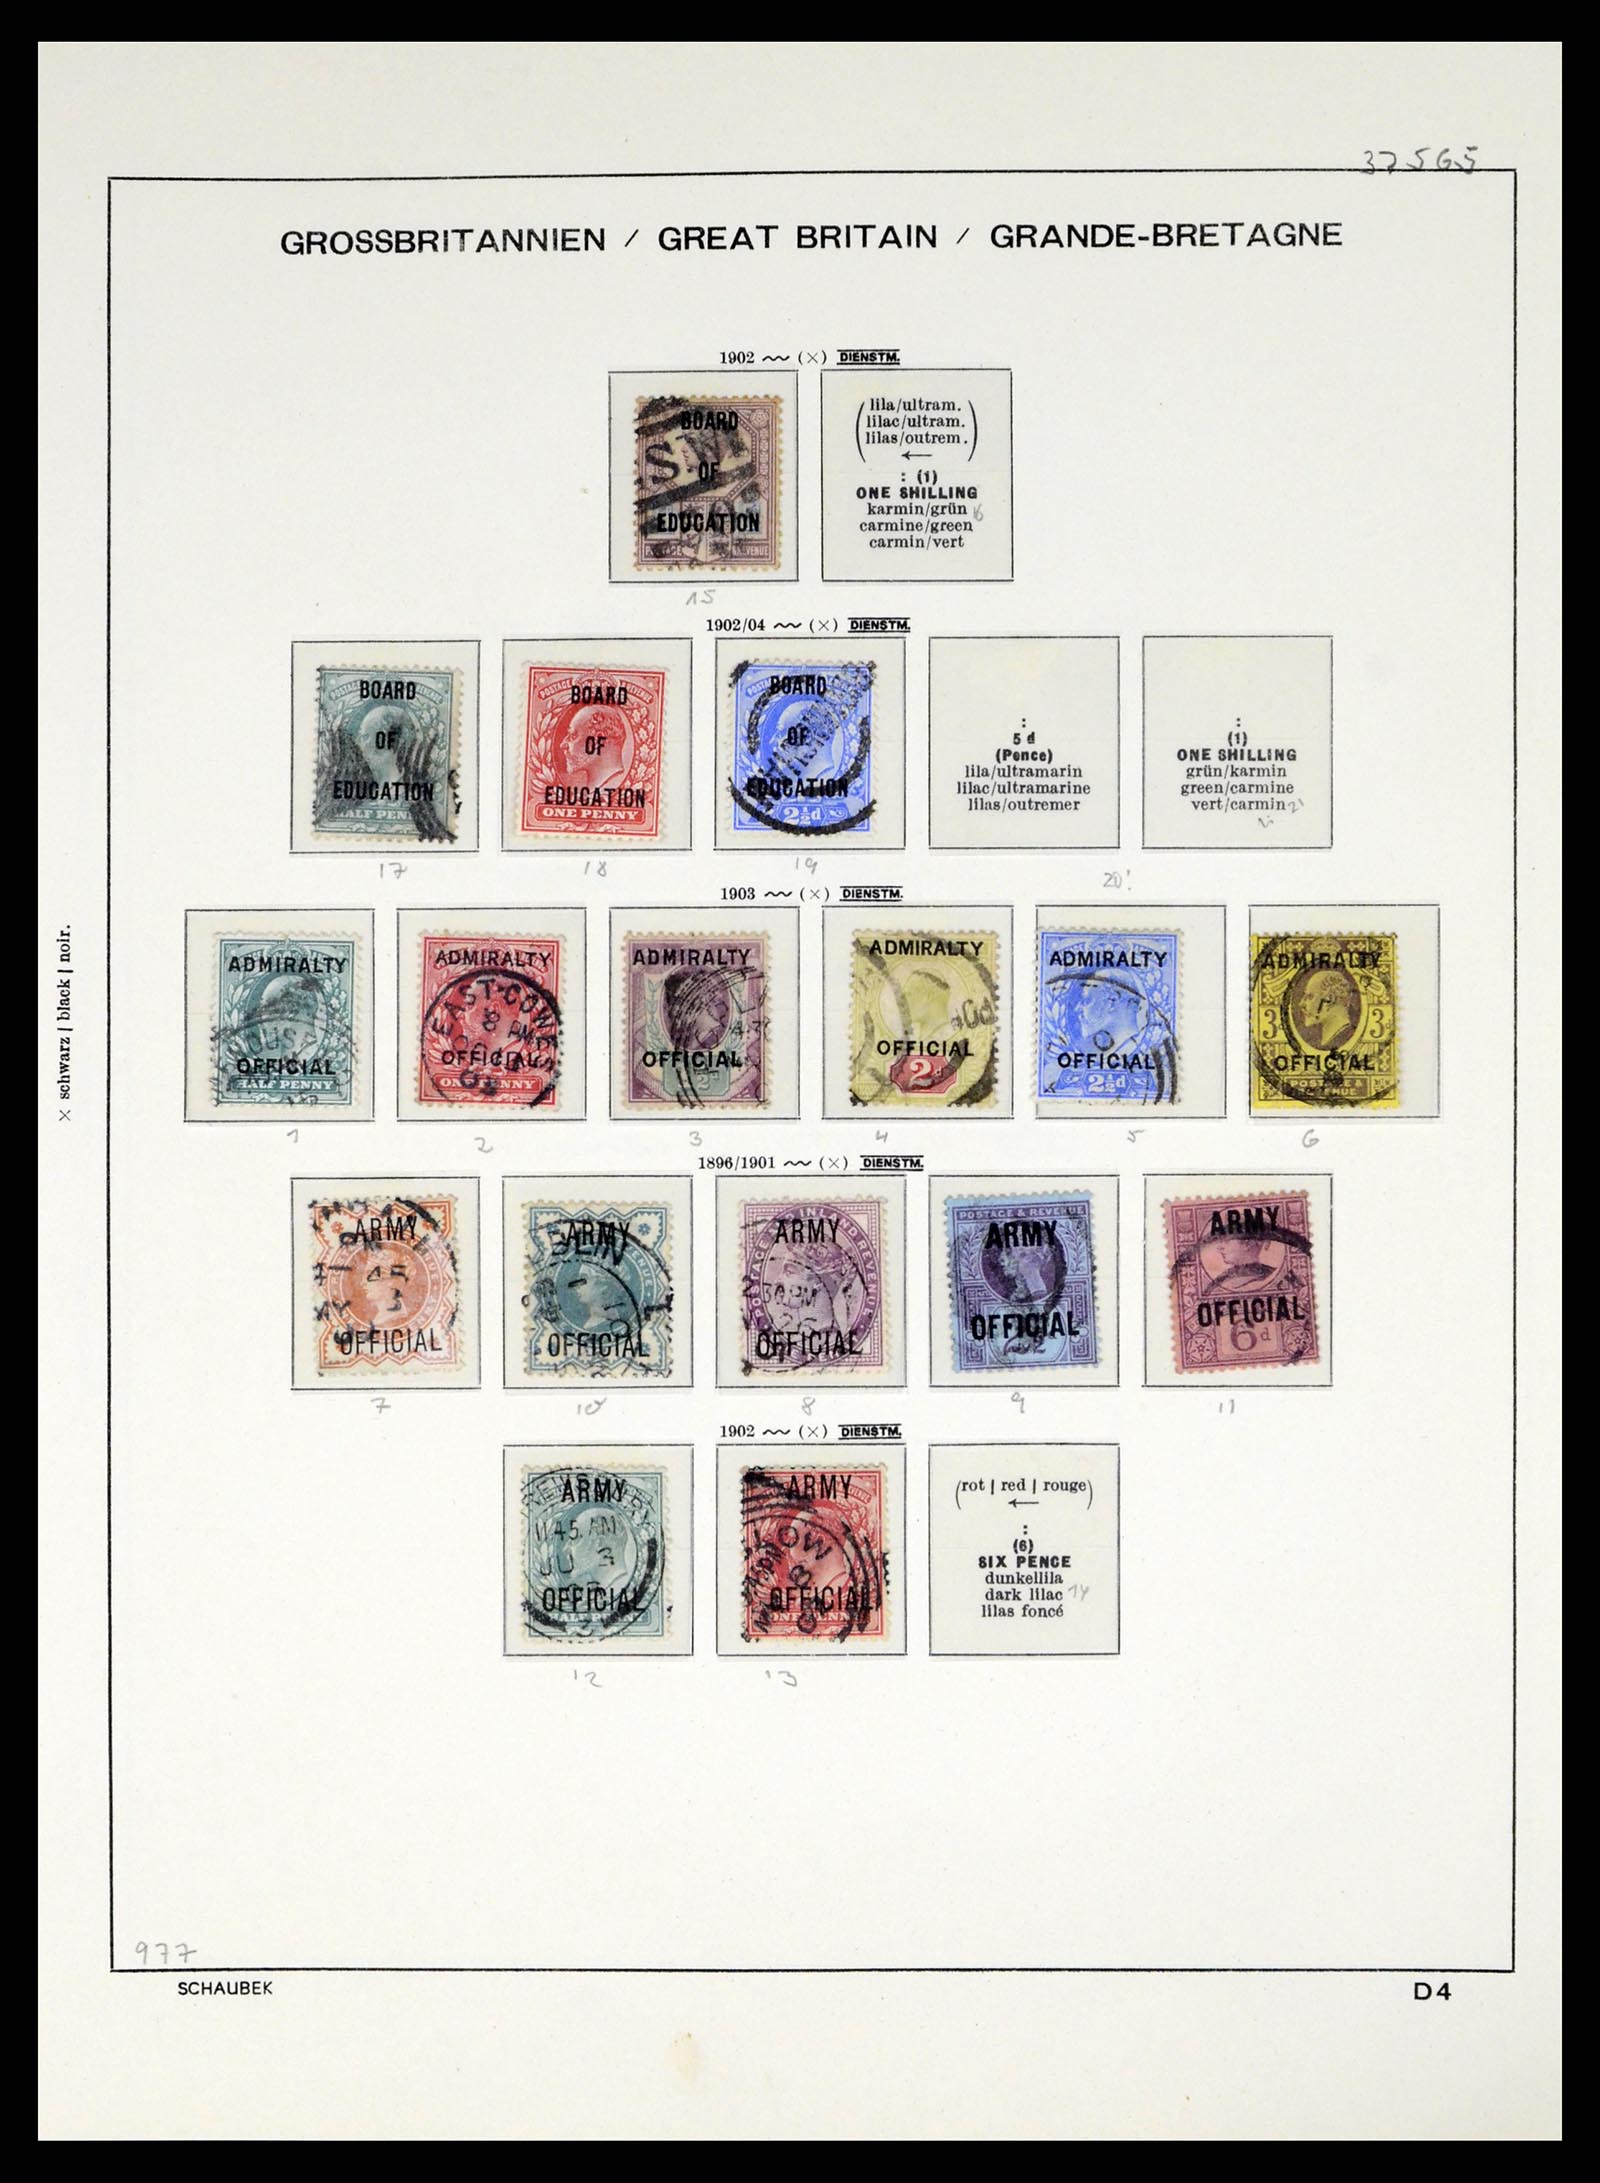 37310 119 - Stamp collection 37310 Great Britain 1840-1988.